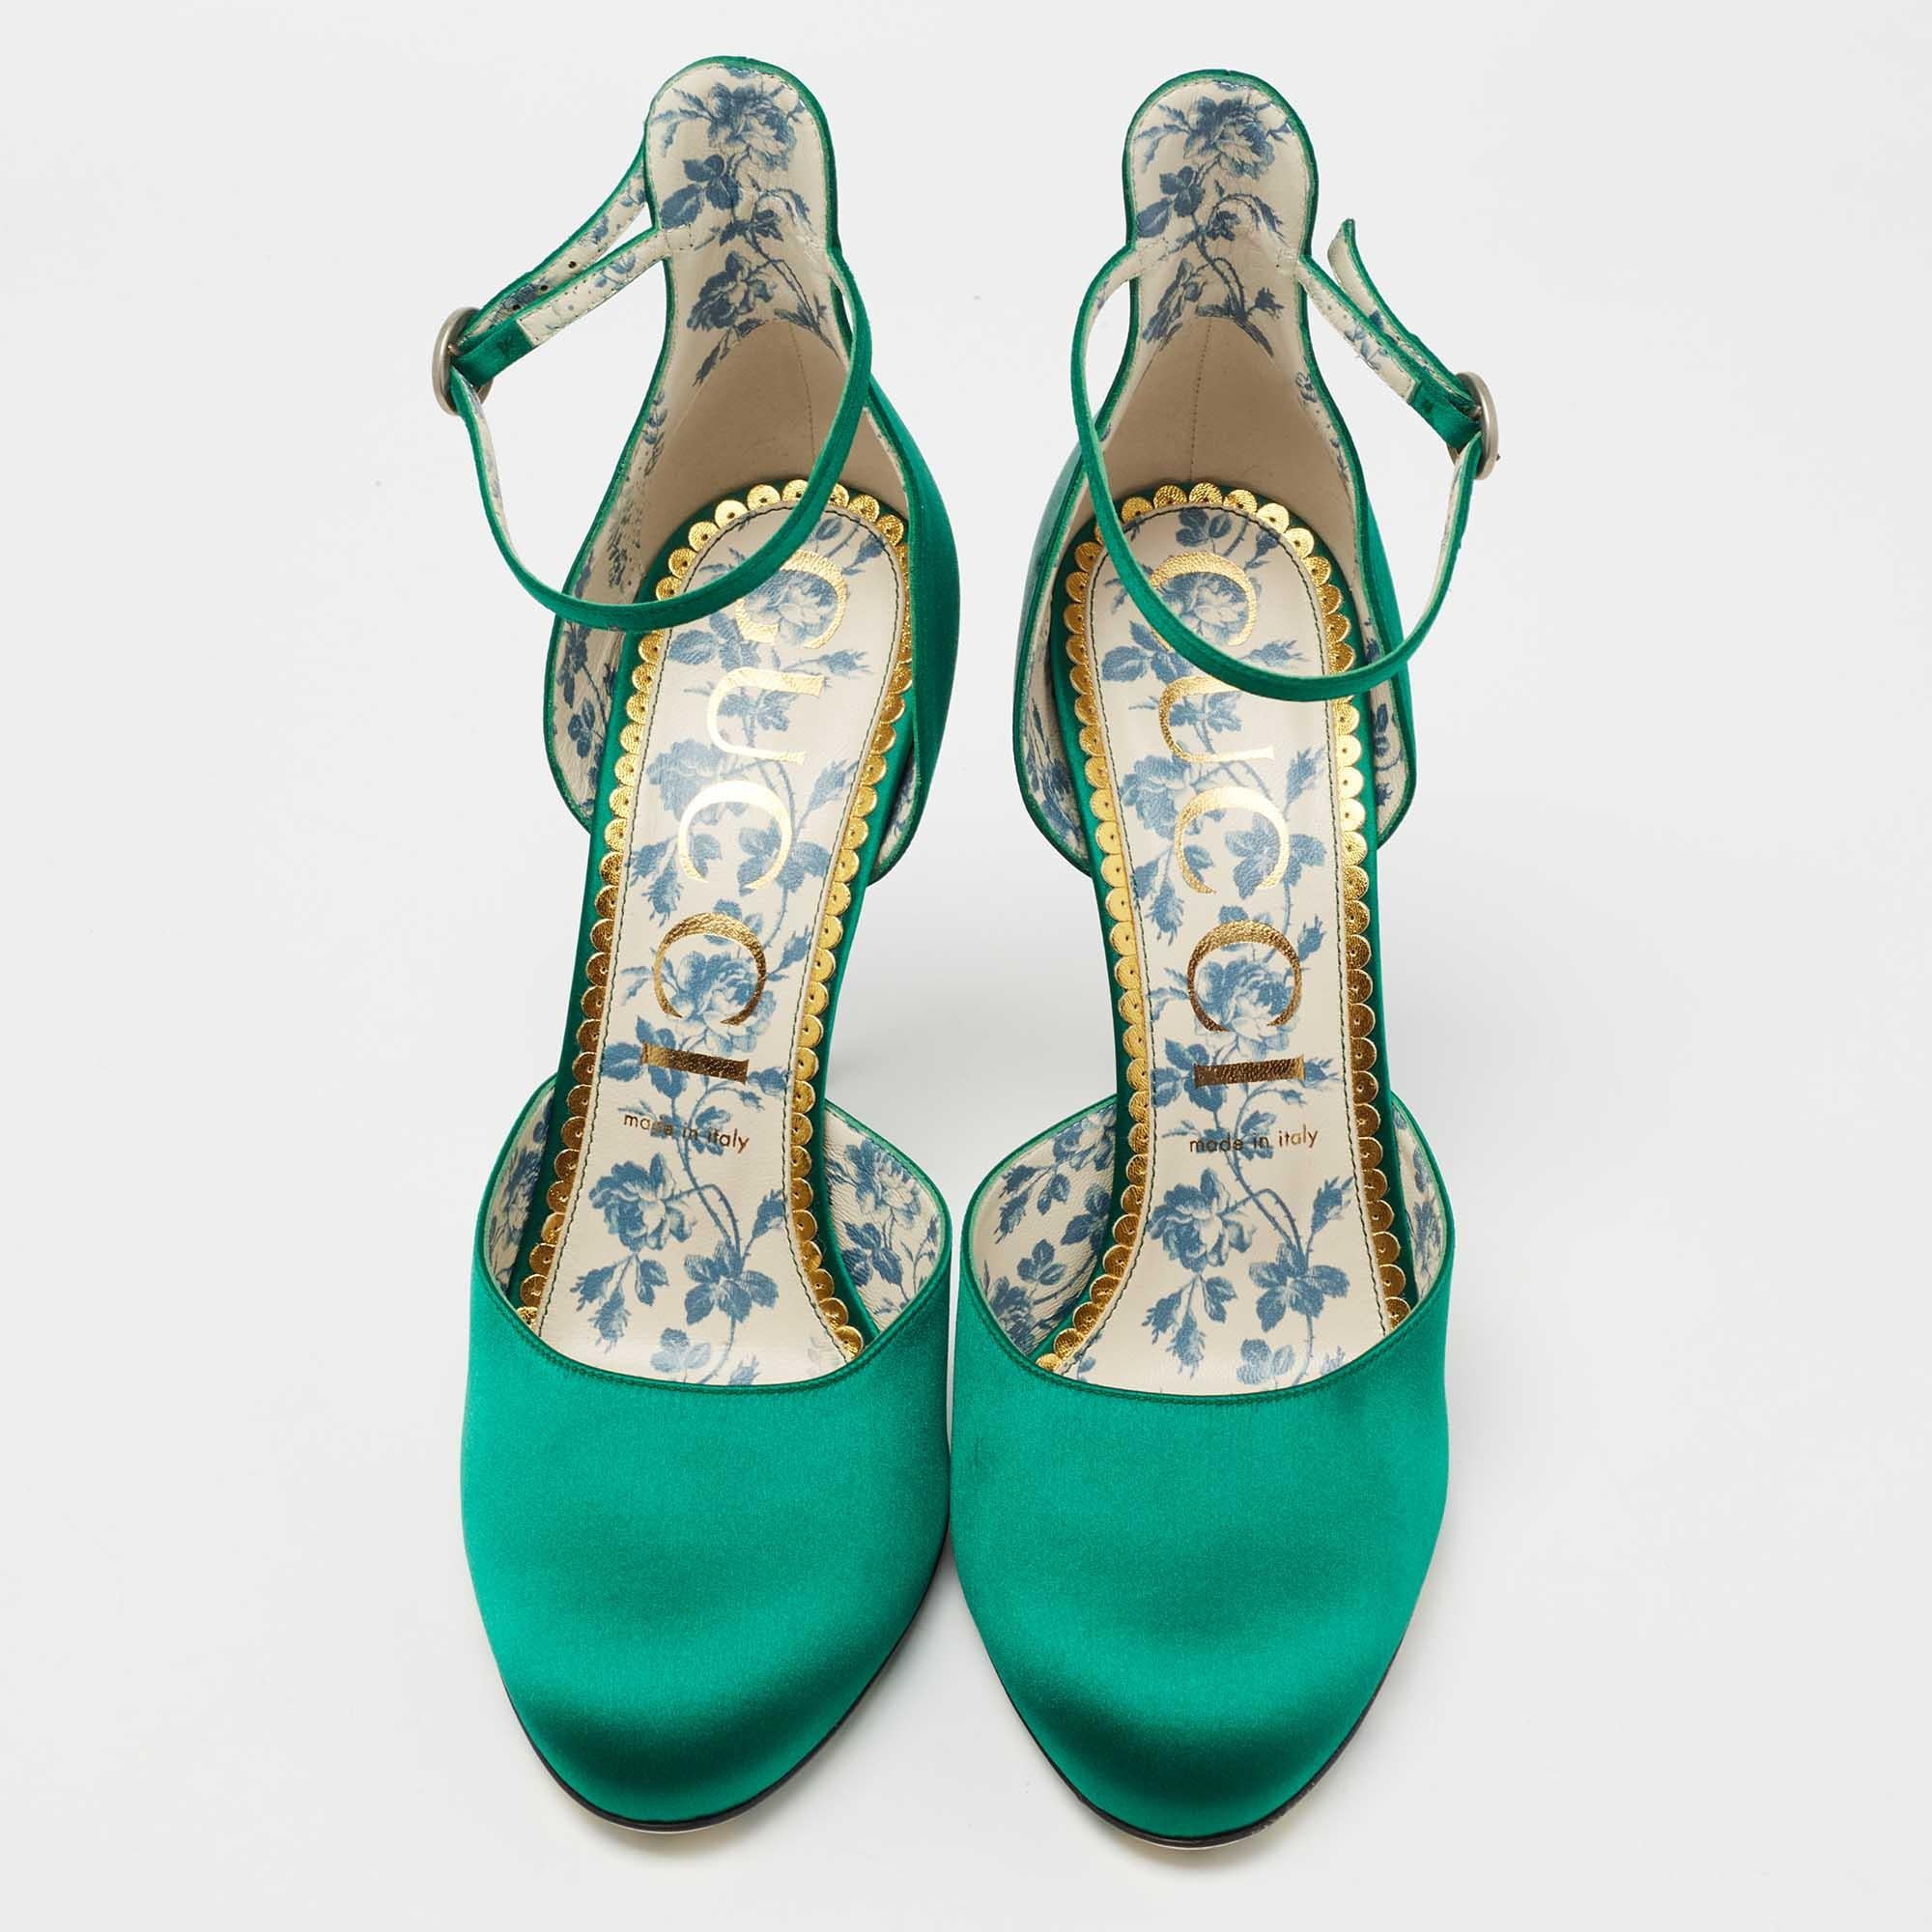 Make a grand entrance at the next party by donning these gorgeous green pumps from the house of Gucci. They are crafted from exquisite satin and have a closed-toe, buckled ankle-strap silhouette. They are beautifully supported by extended counters